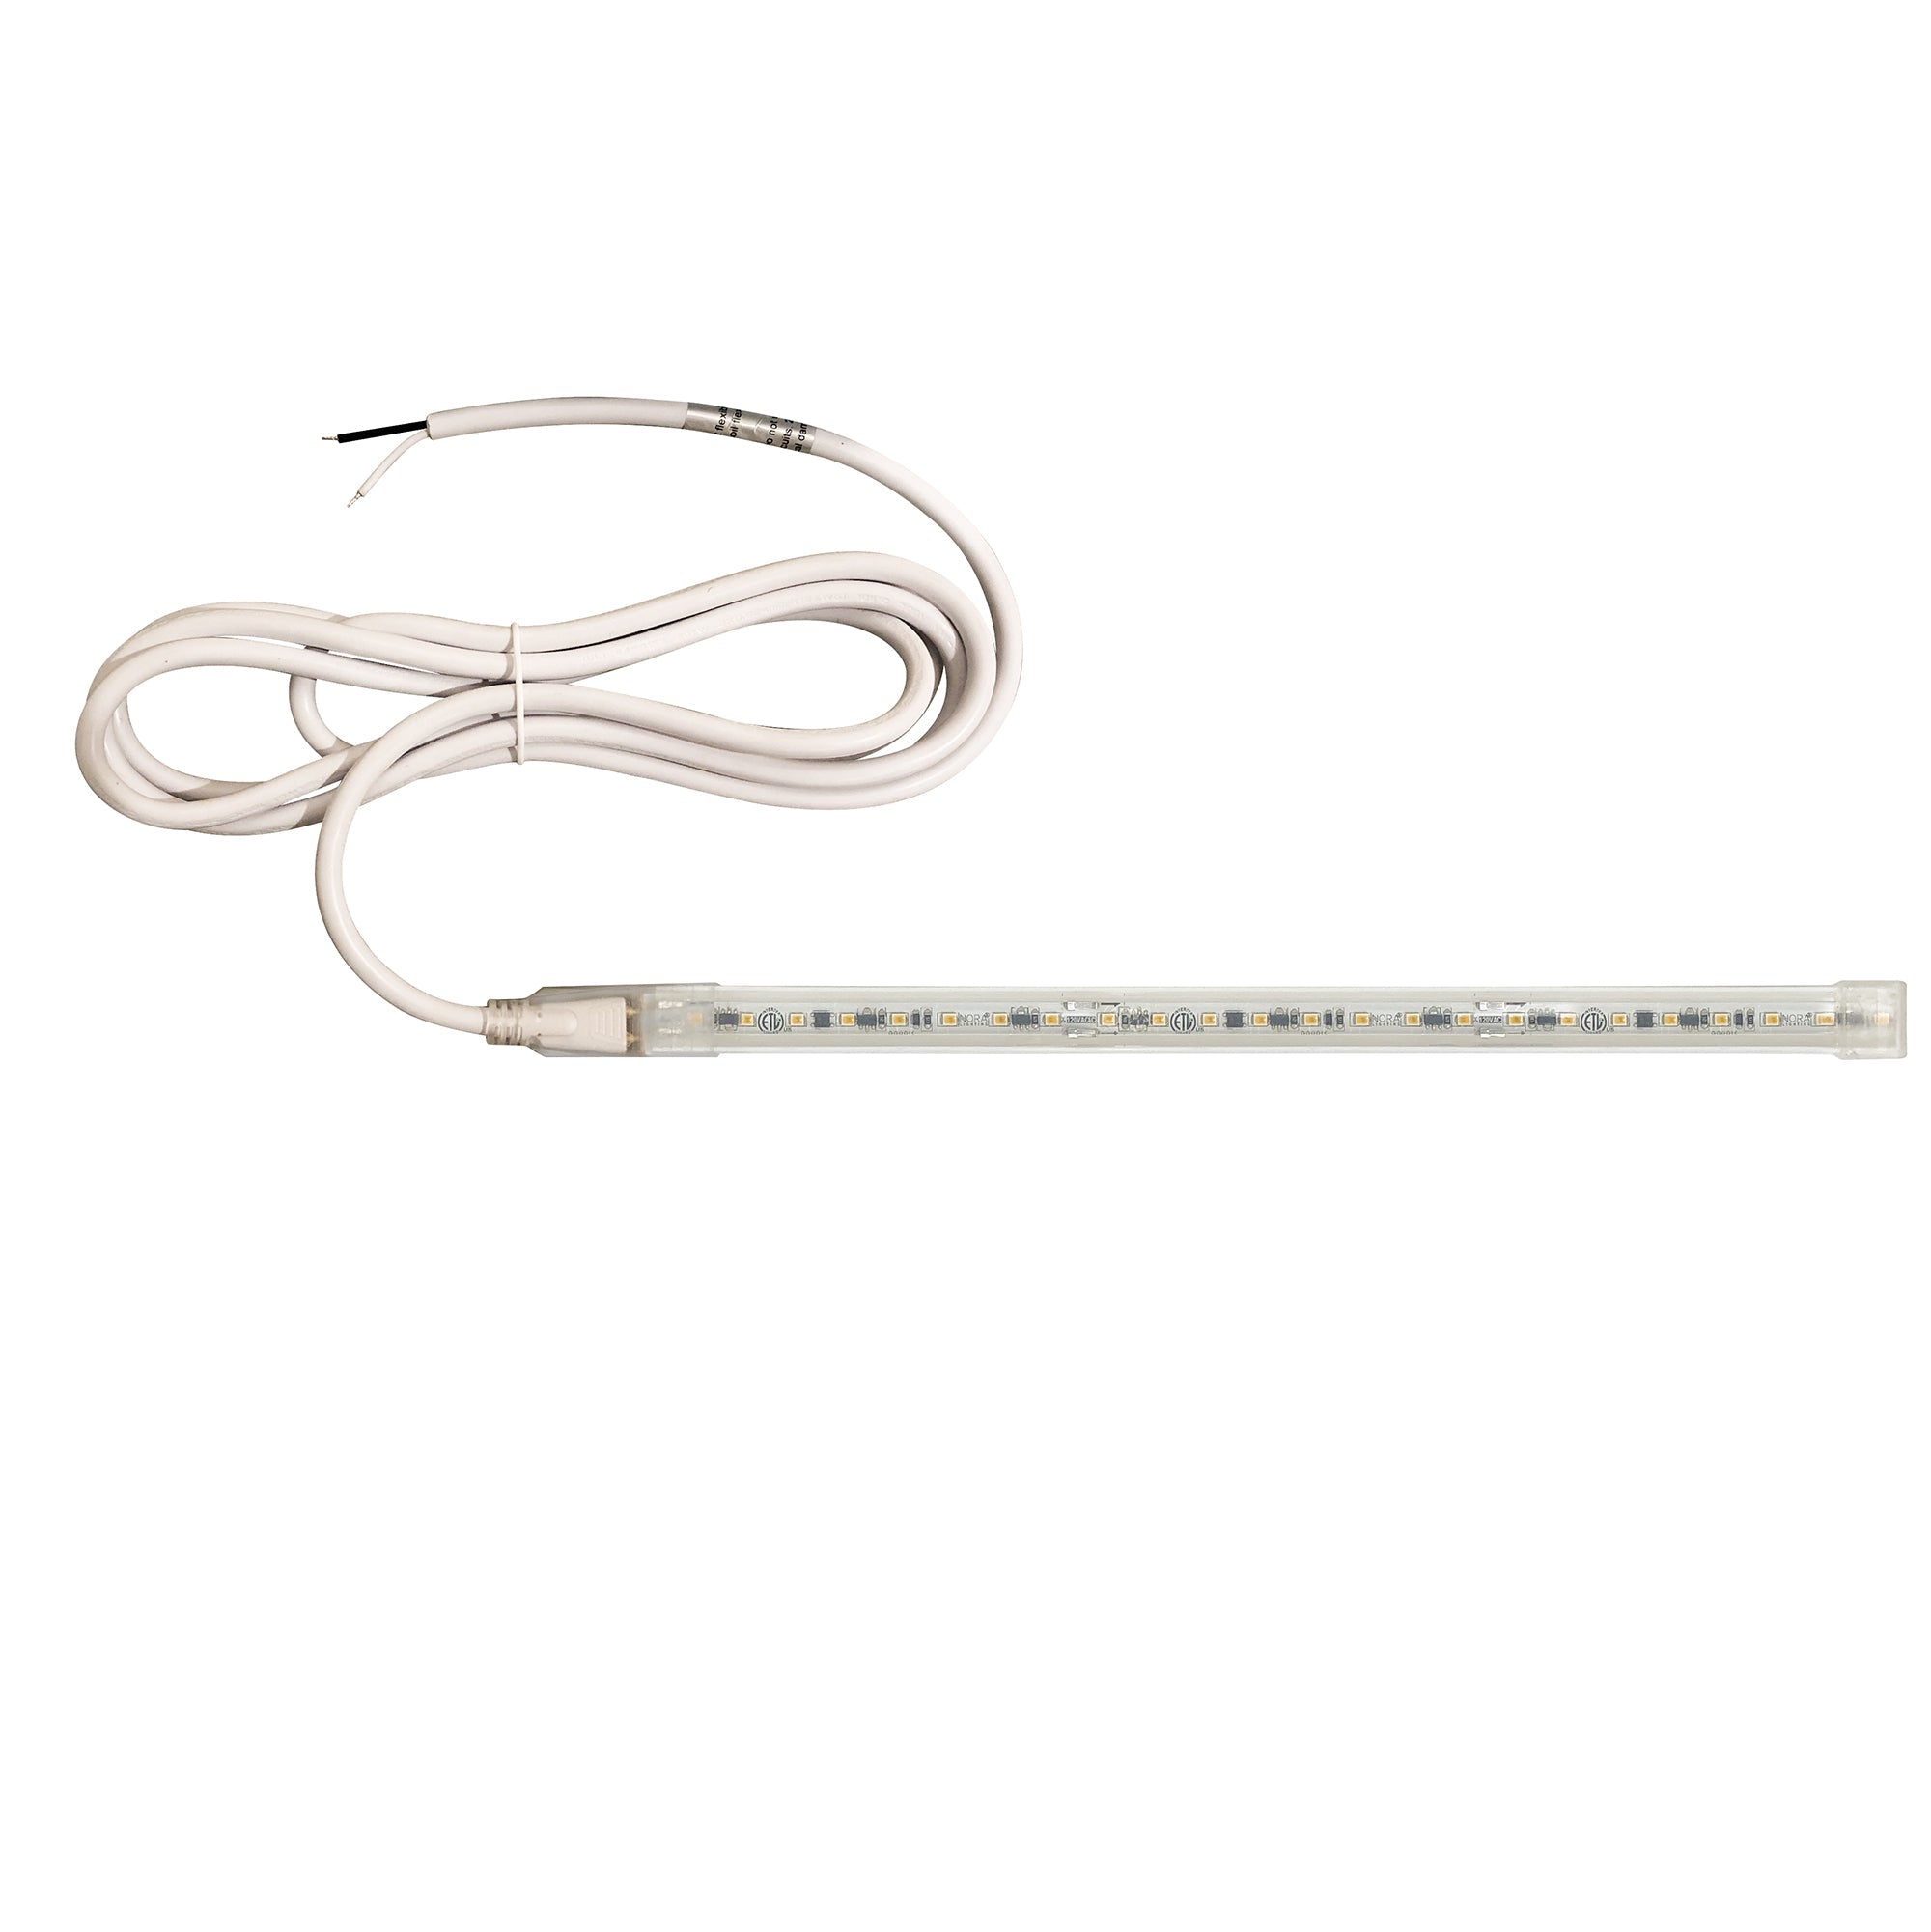 Nora Lighting NUTP13-W54-8-12-930/HW - Accent / Undercabinet - Custom Cut 54-ft, 8-in 120V Continuous LED Tape Light, 330lm / 3.6W per foot, 3000K, w/ Mounting Clips and 8' Hardwired Power Cord